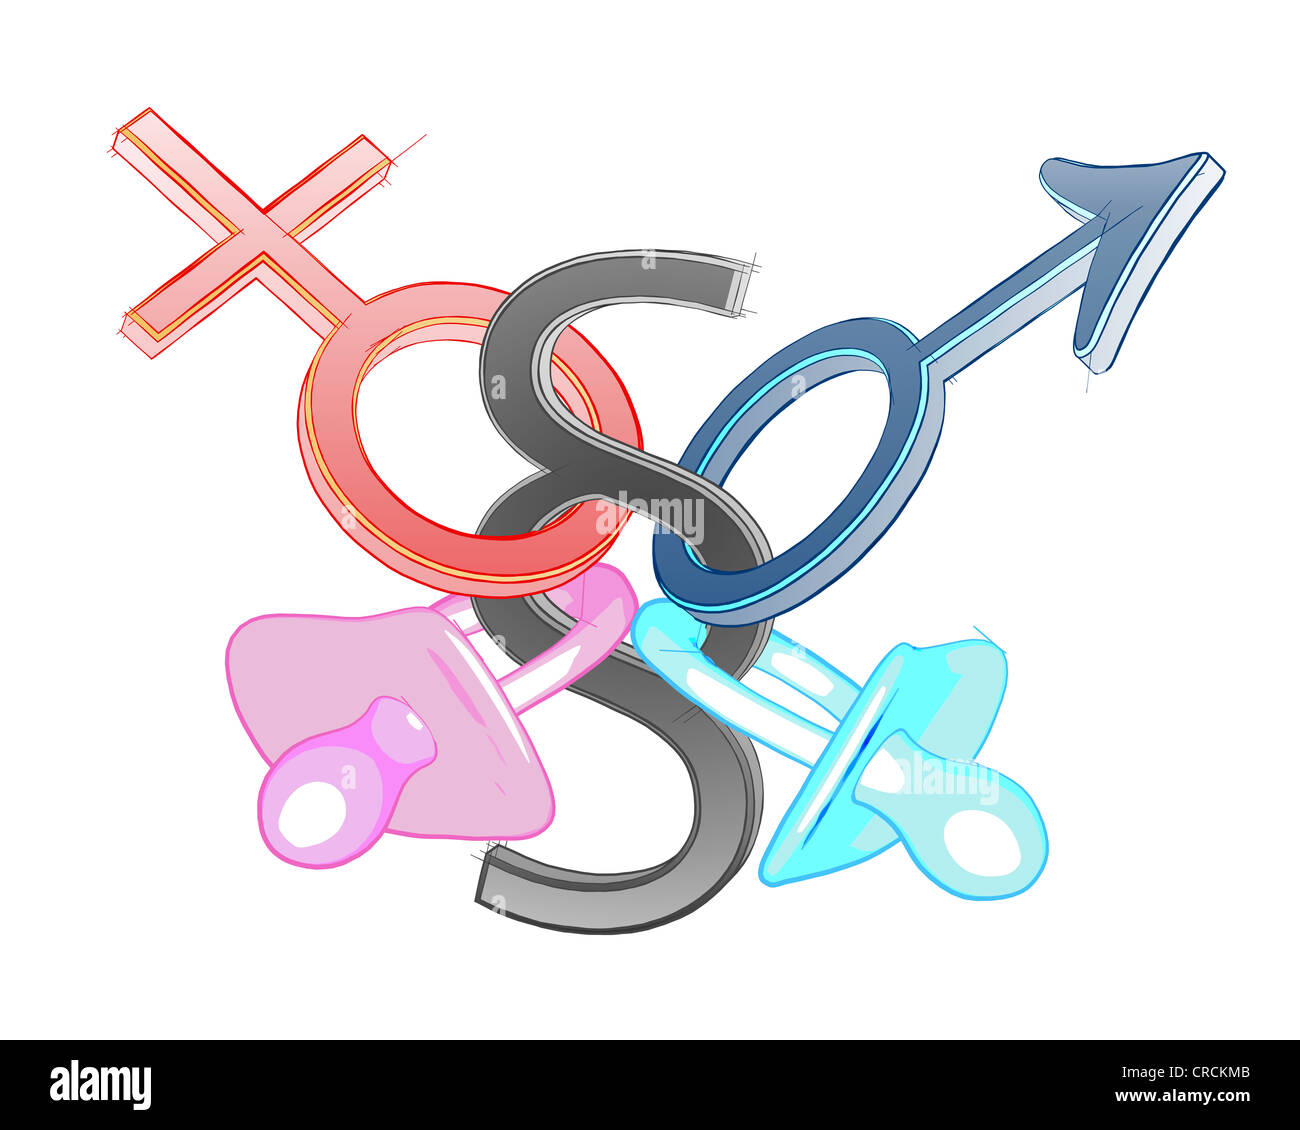 Mars and Venus symbols connected to pacifiers and a German legal paragraph symbol, illustration, symbolic image for marriage law Stock Photo